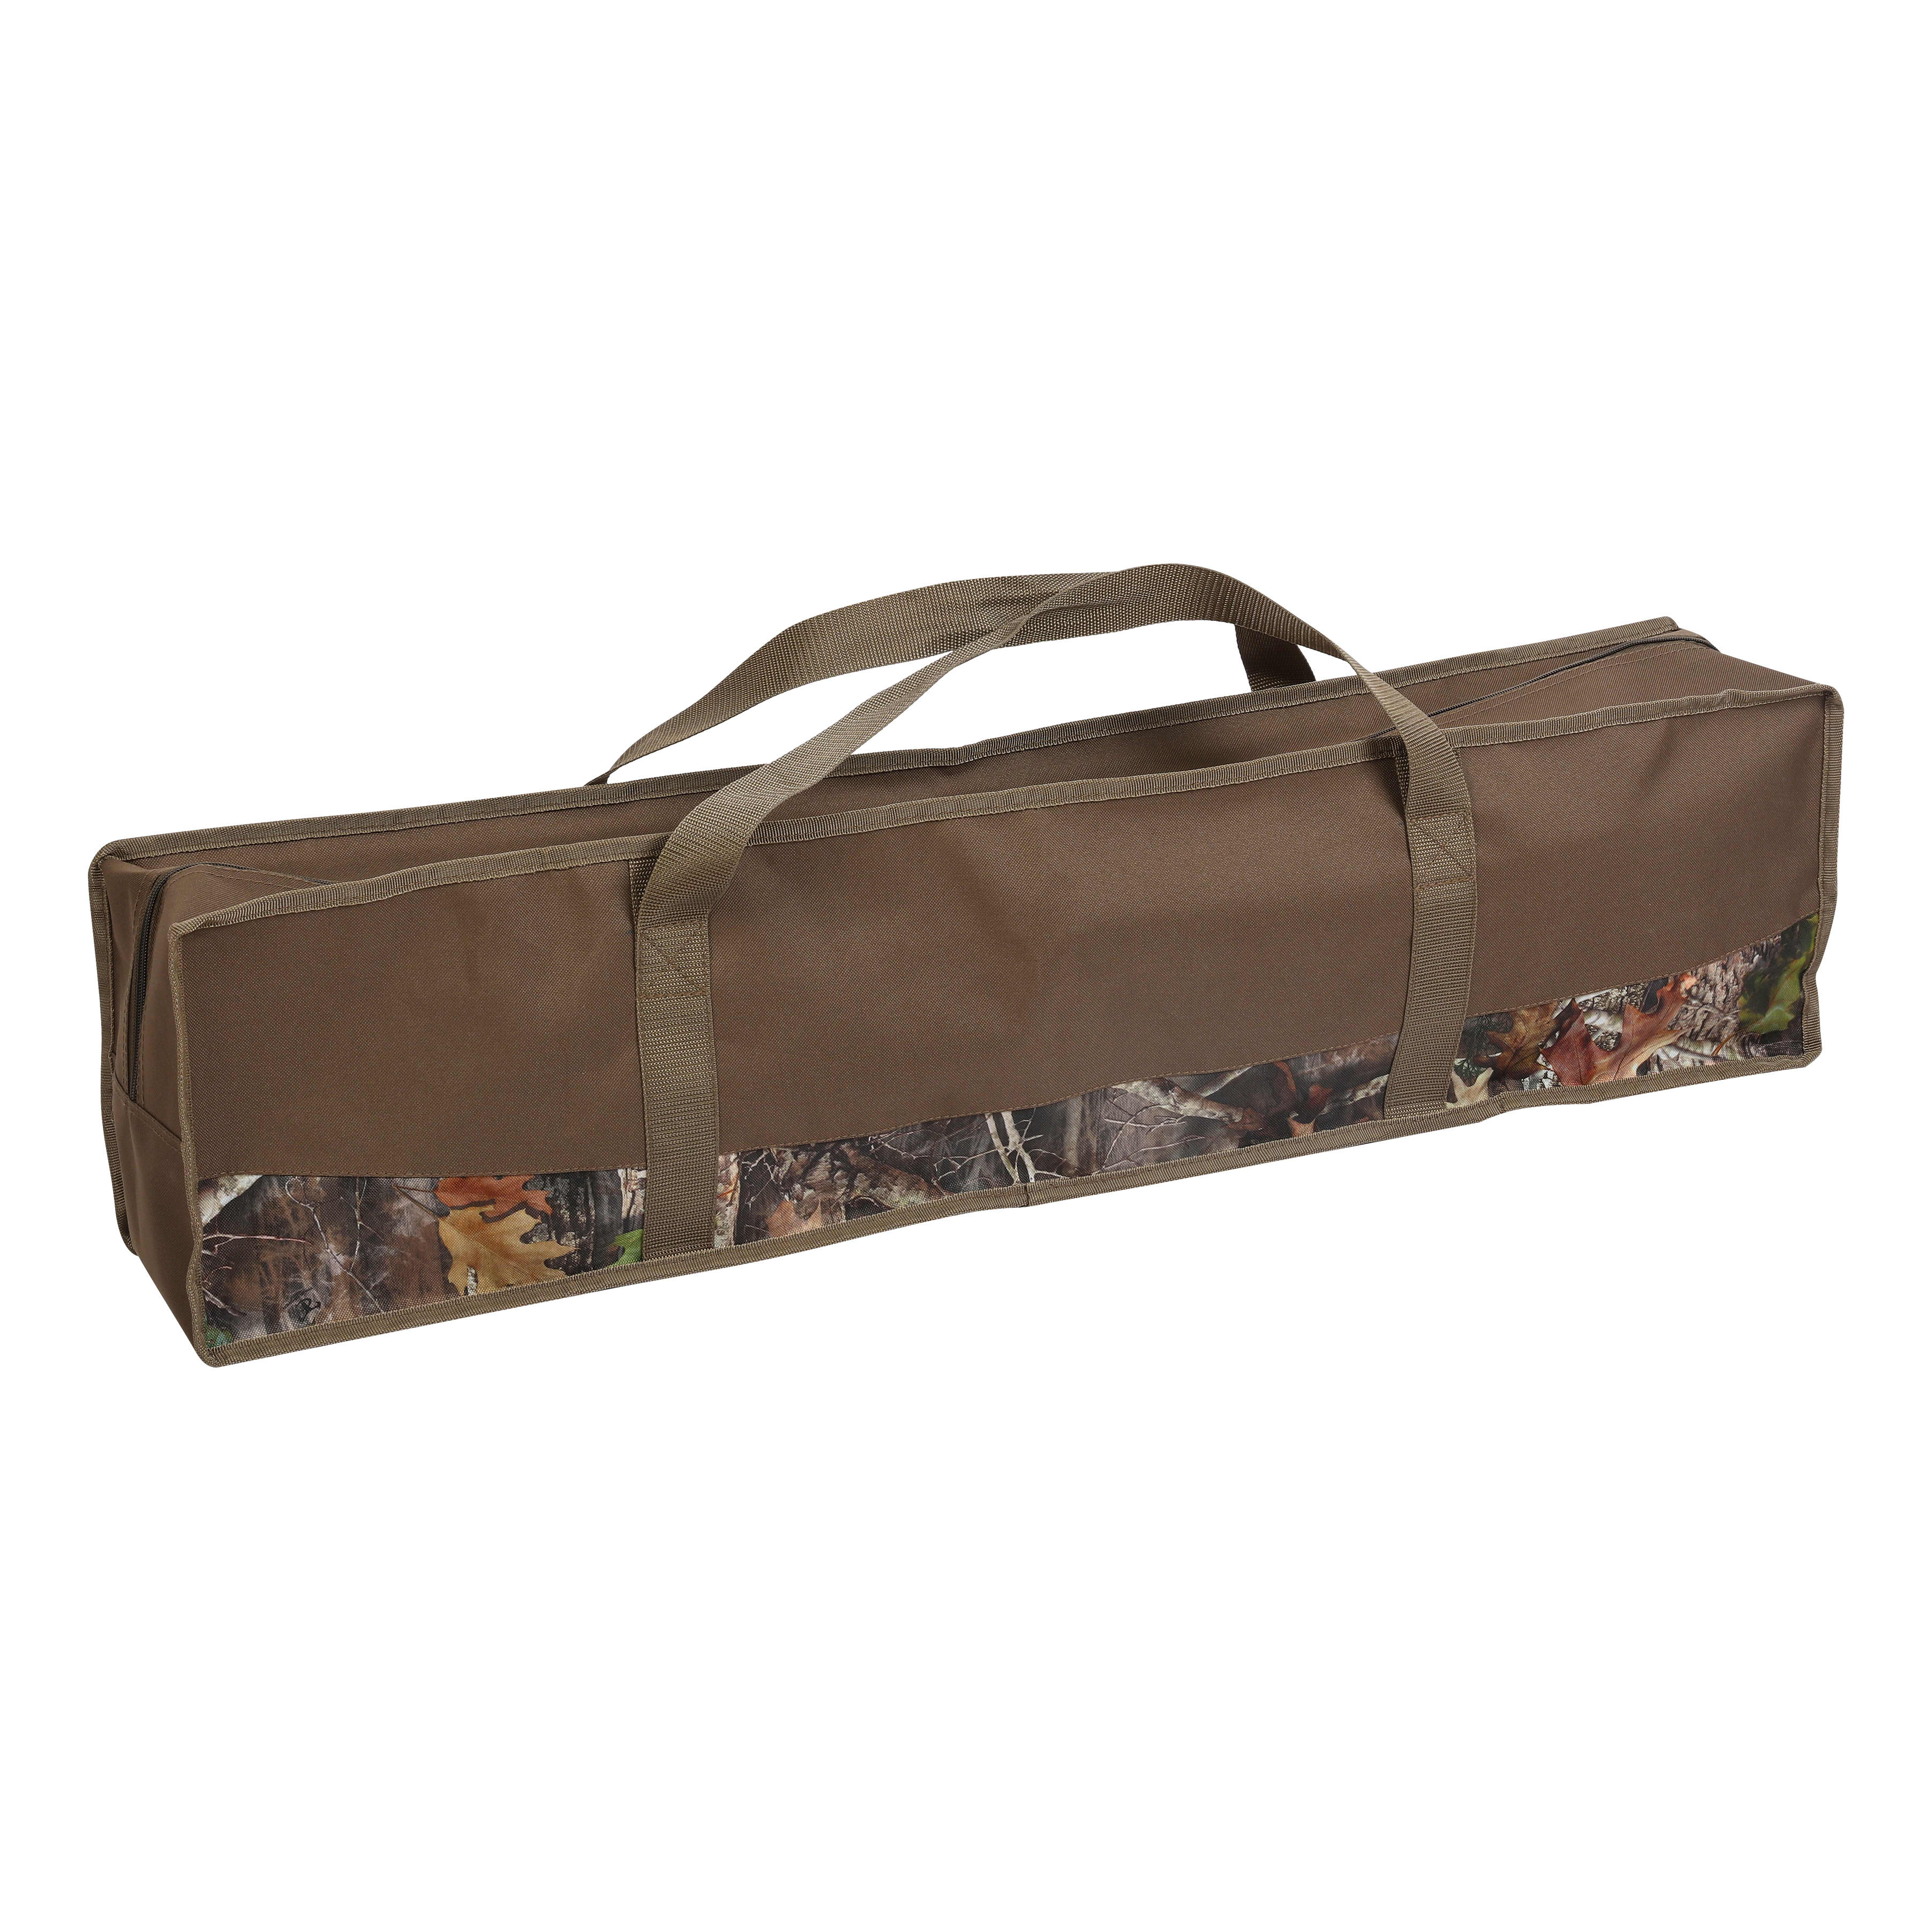 Cabela's Camp Cot w/Organizer - Carrying Bag View